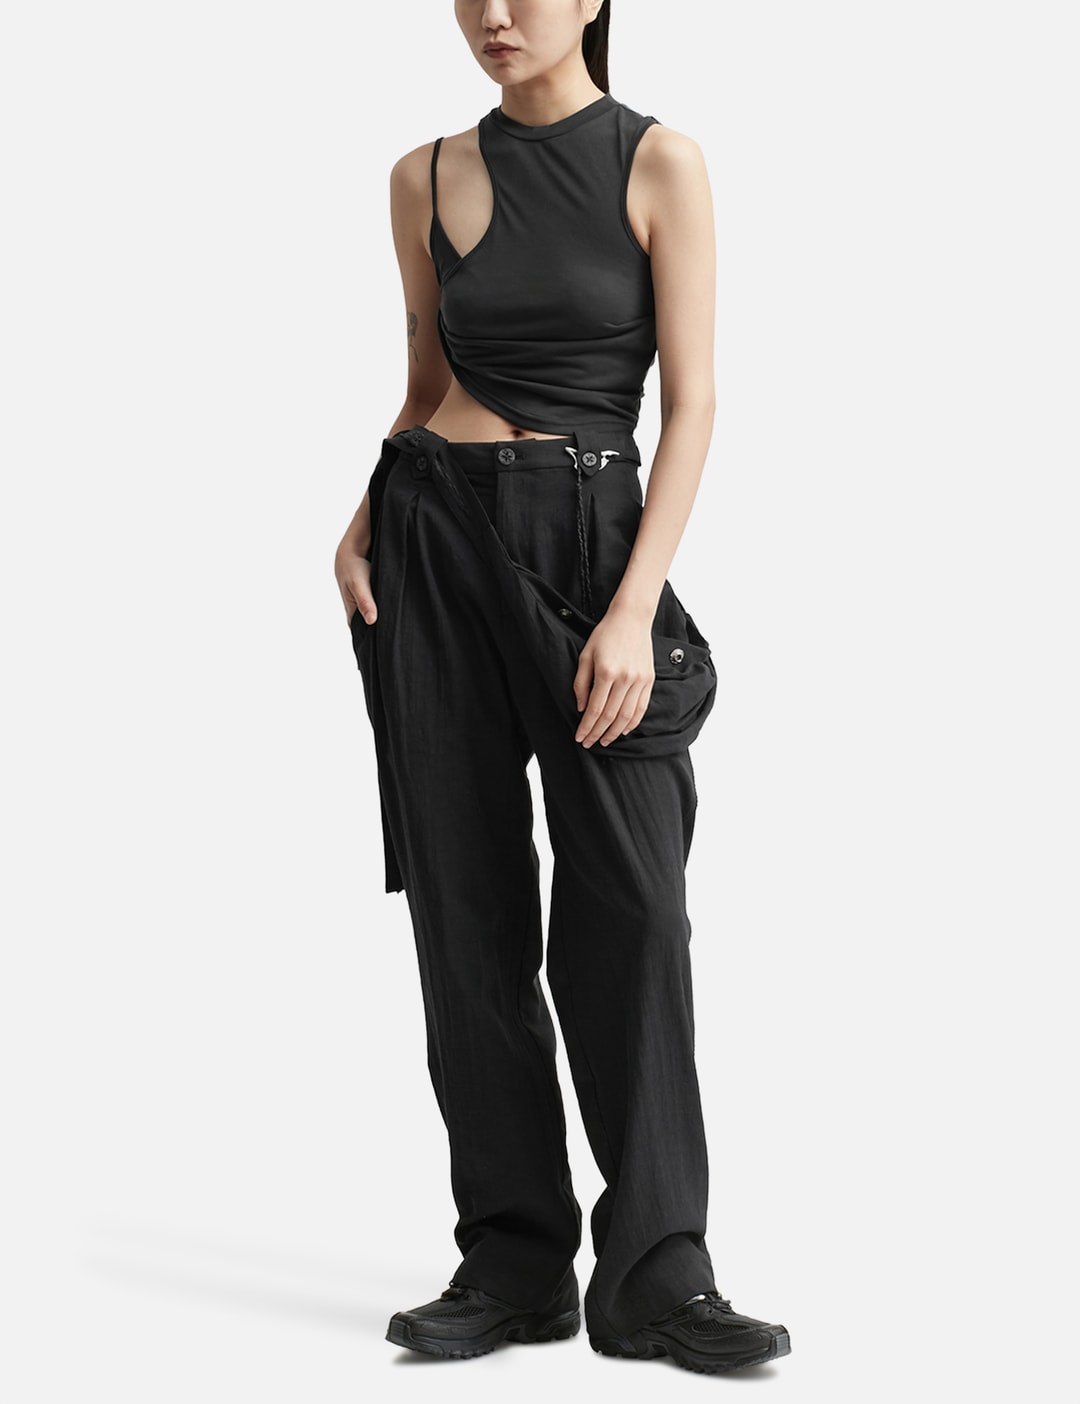 Hyein Seo - THERMAL TUBE TOP  HBX - Globally Curated Fashion and